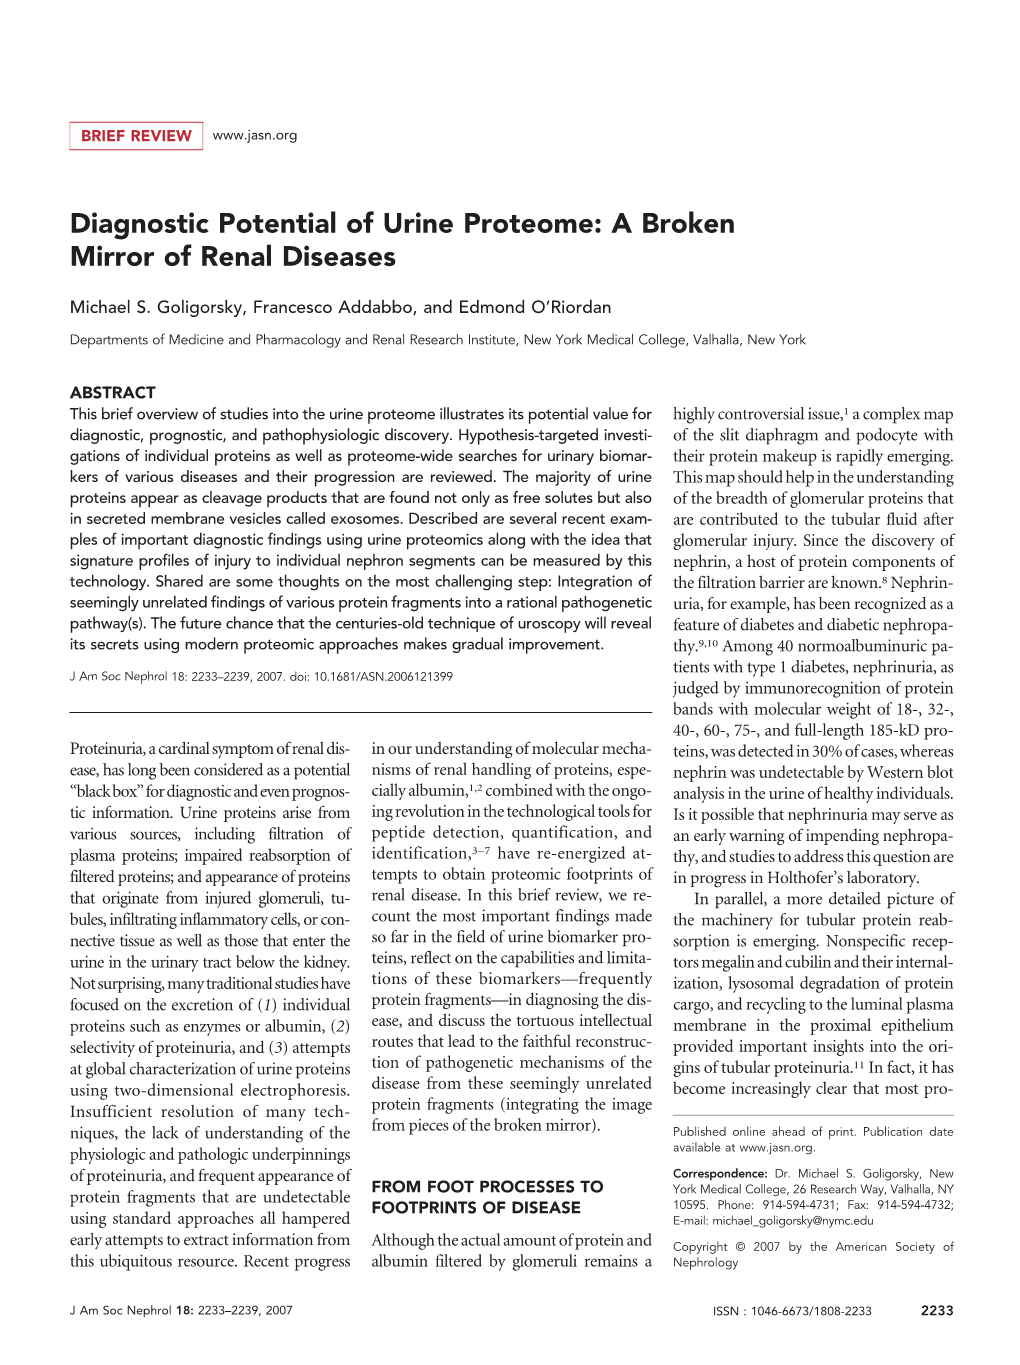 Diagnostic Potential of Urine Proteome: a Broken Mirror of Renal Diseases